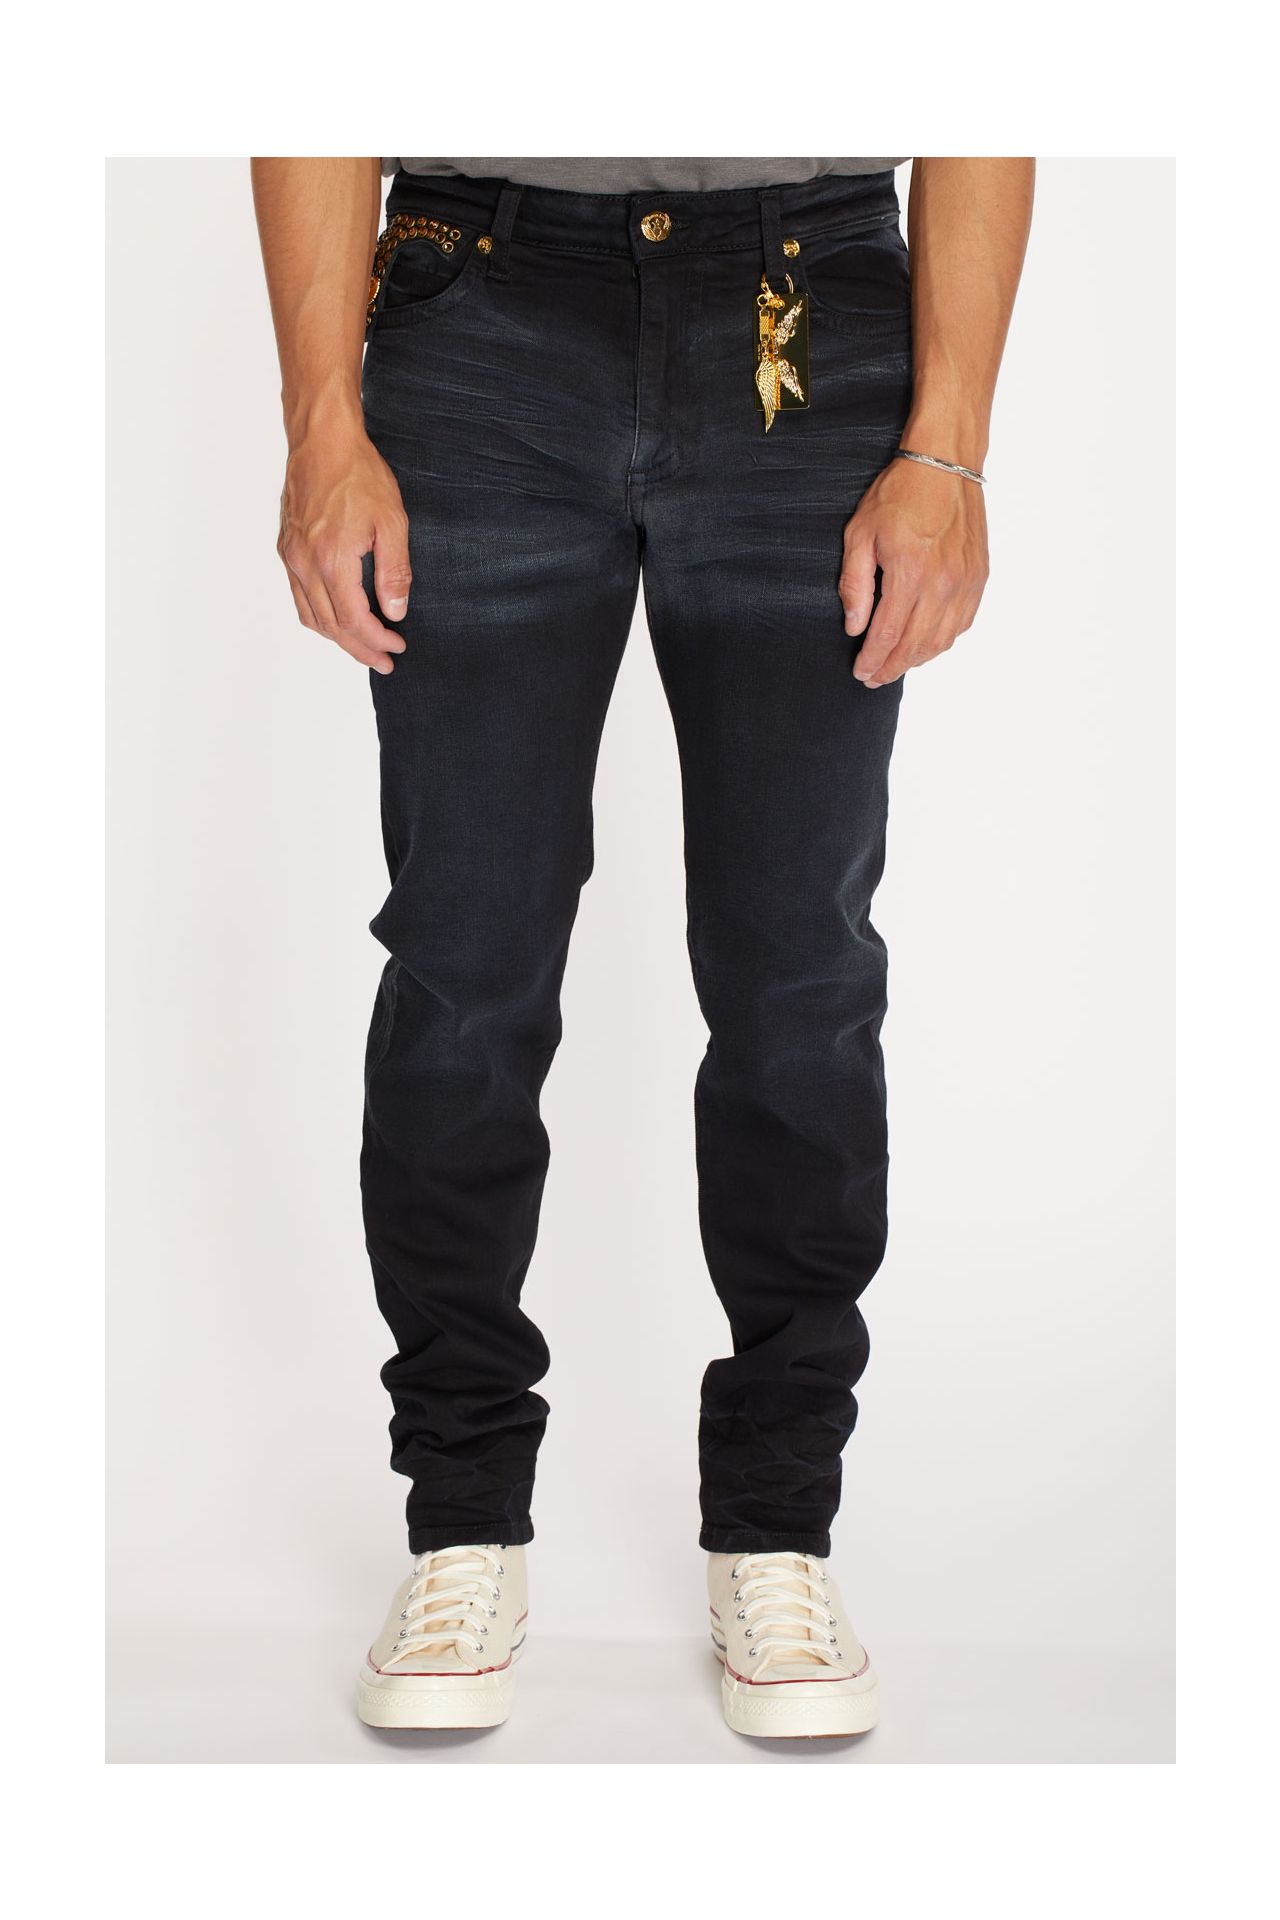 KILLER FLAP SKINNY MENS JEANS IN F_UP BLACK WITH FULL GOLD CRYSTALS